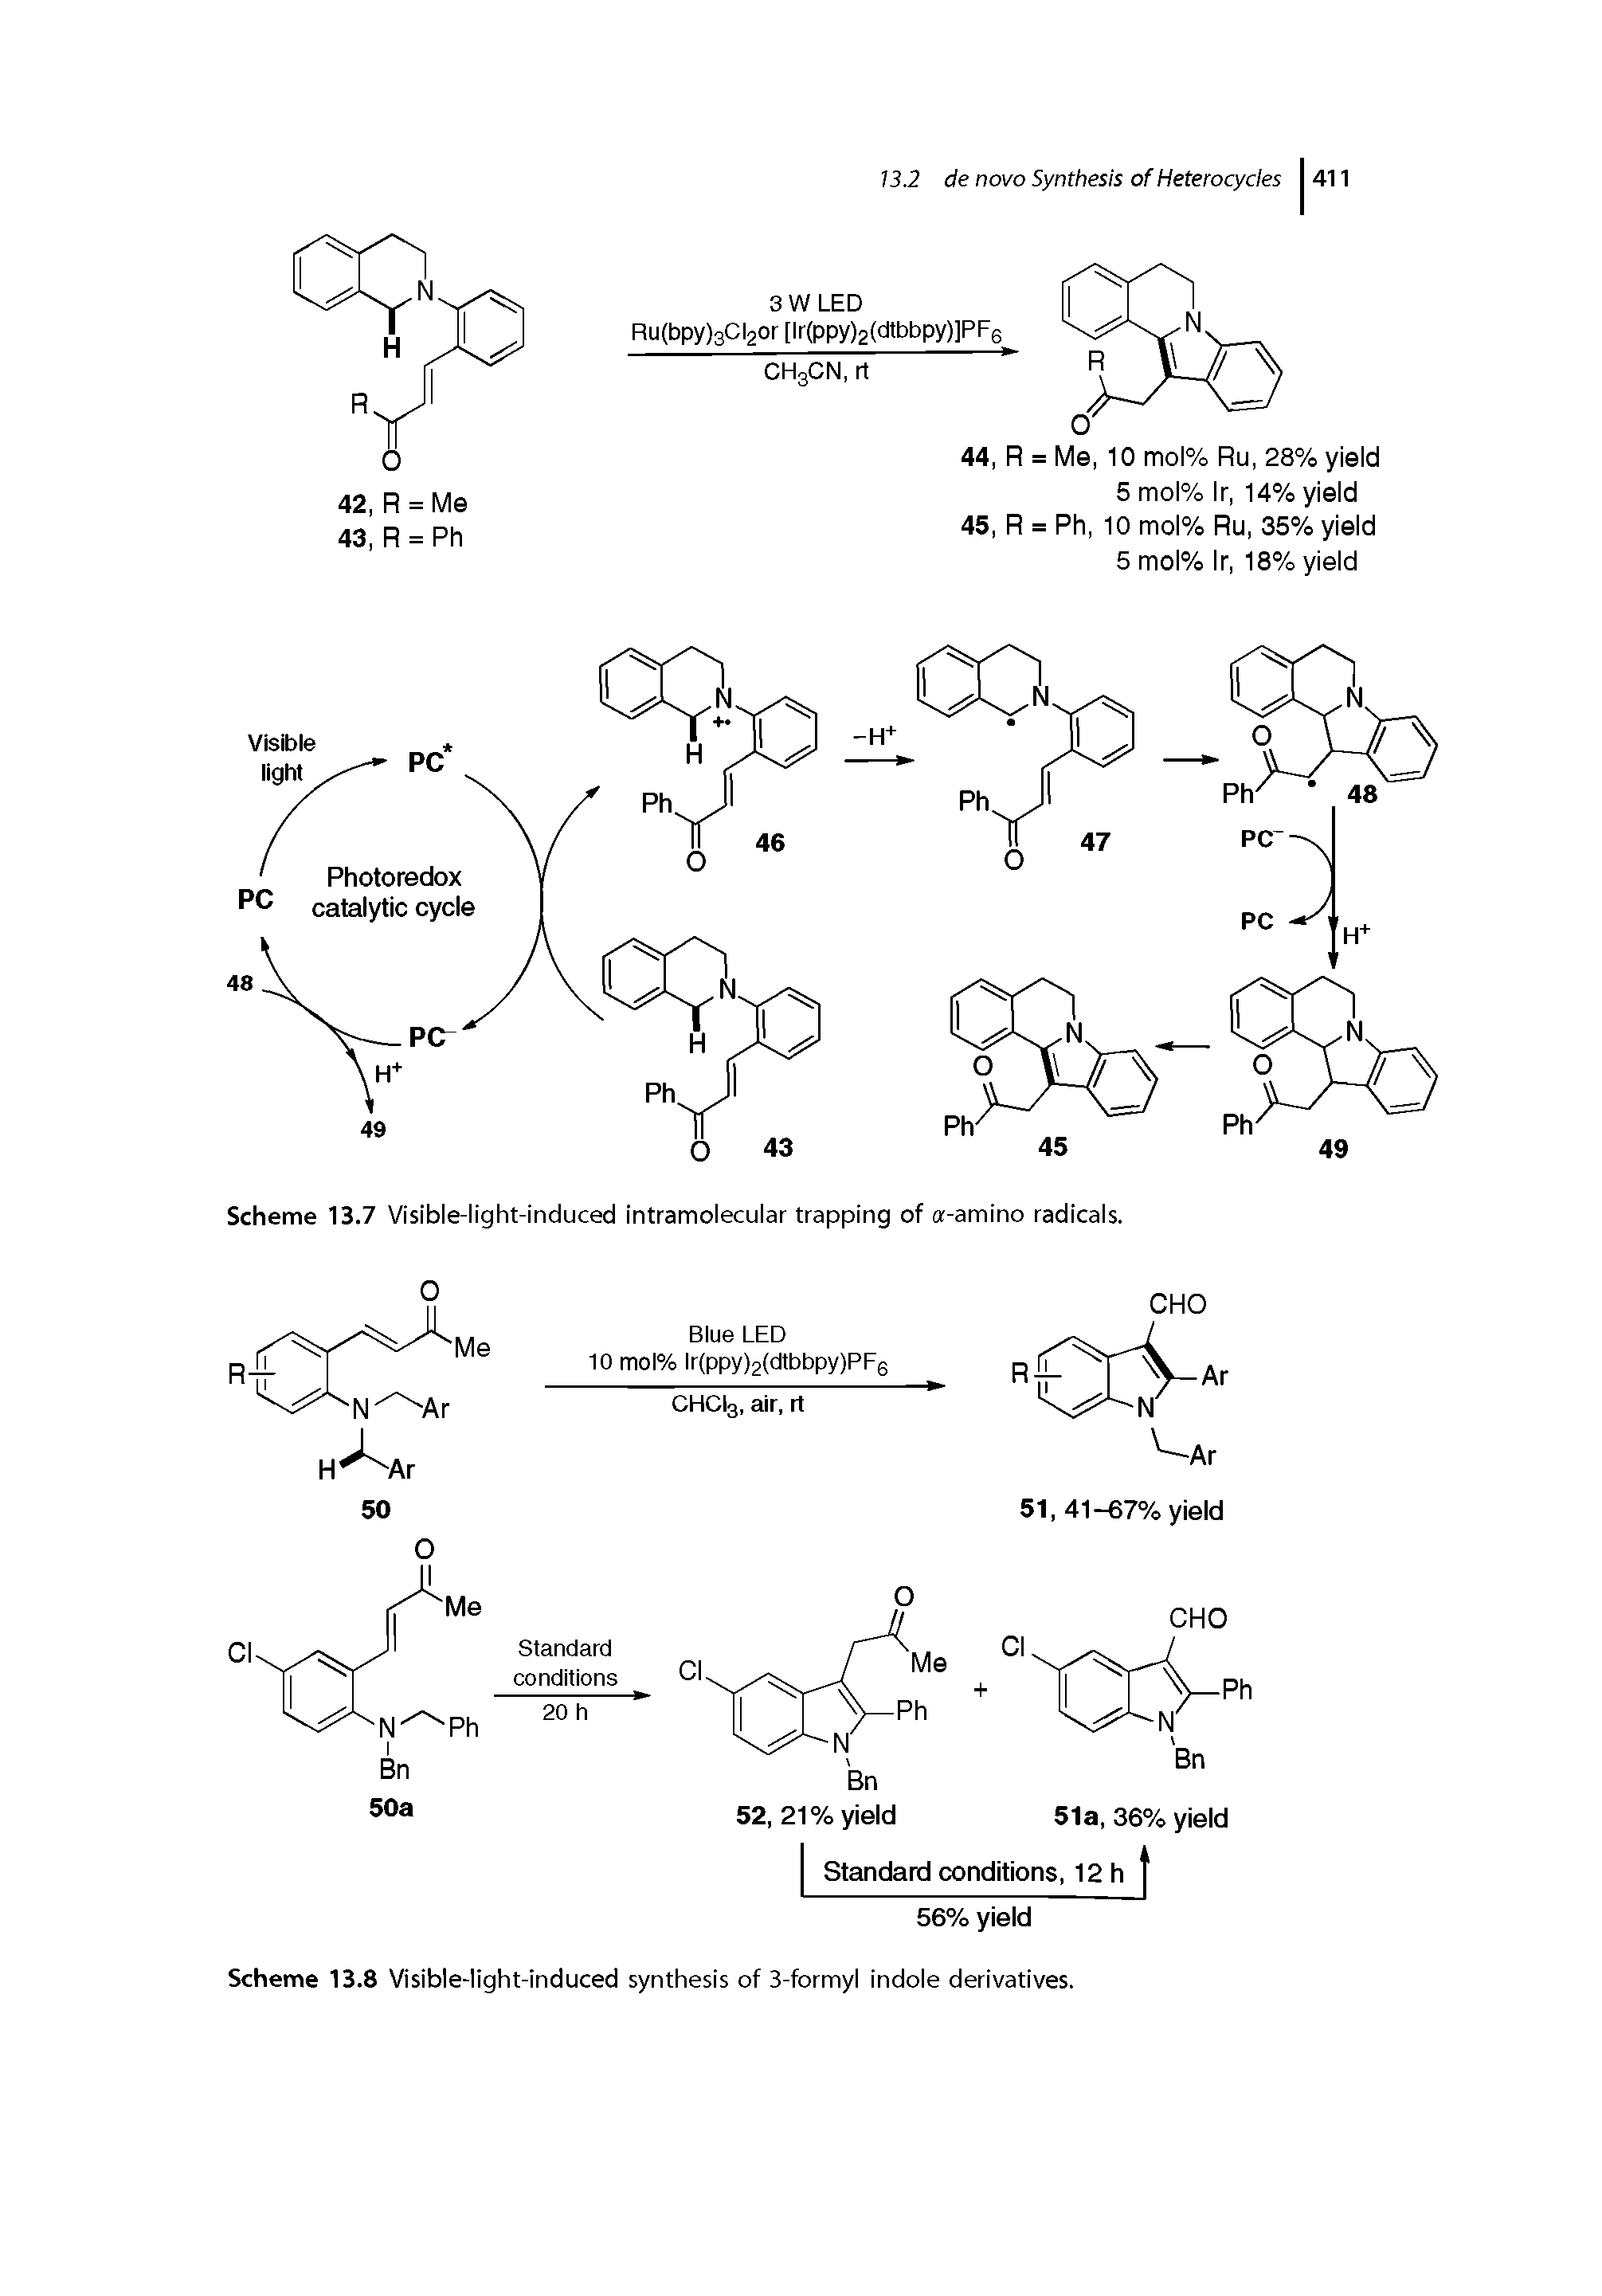 Scheme 13.8 Visible-light-induced synthesis of 3-formyl Indole derivatives.